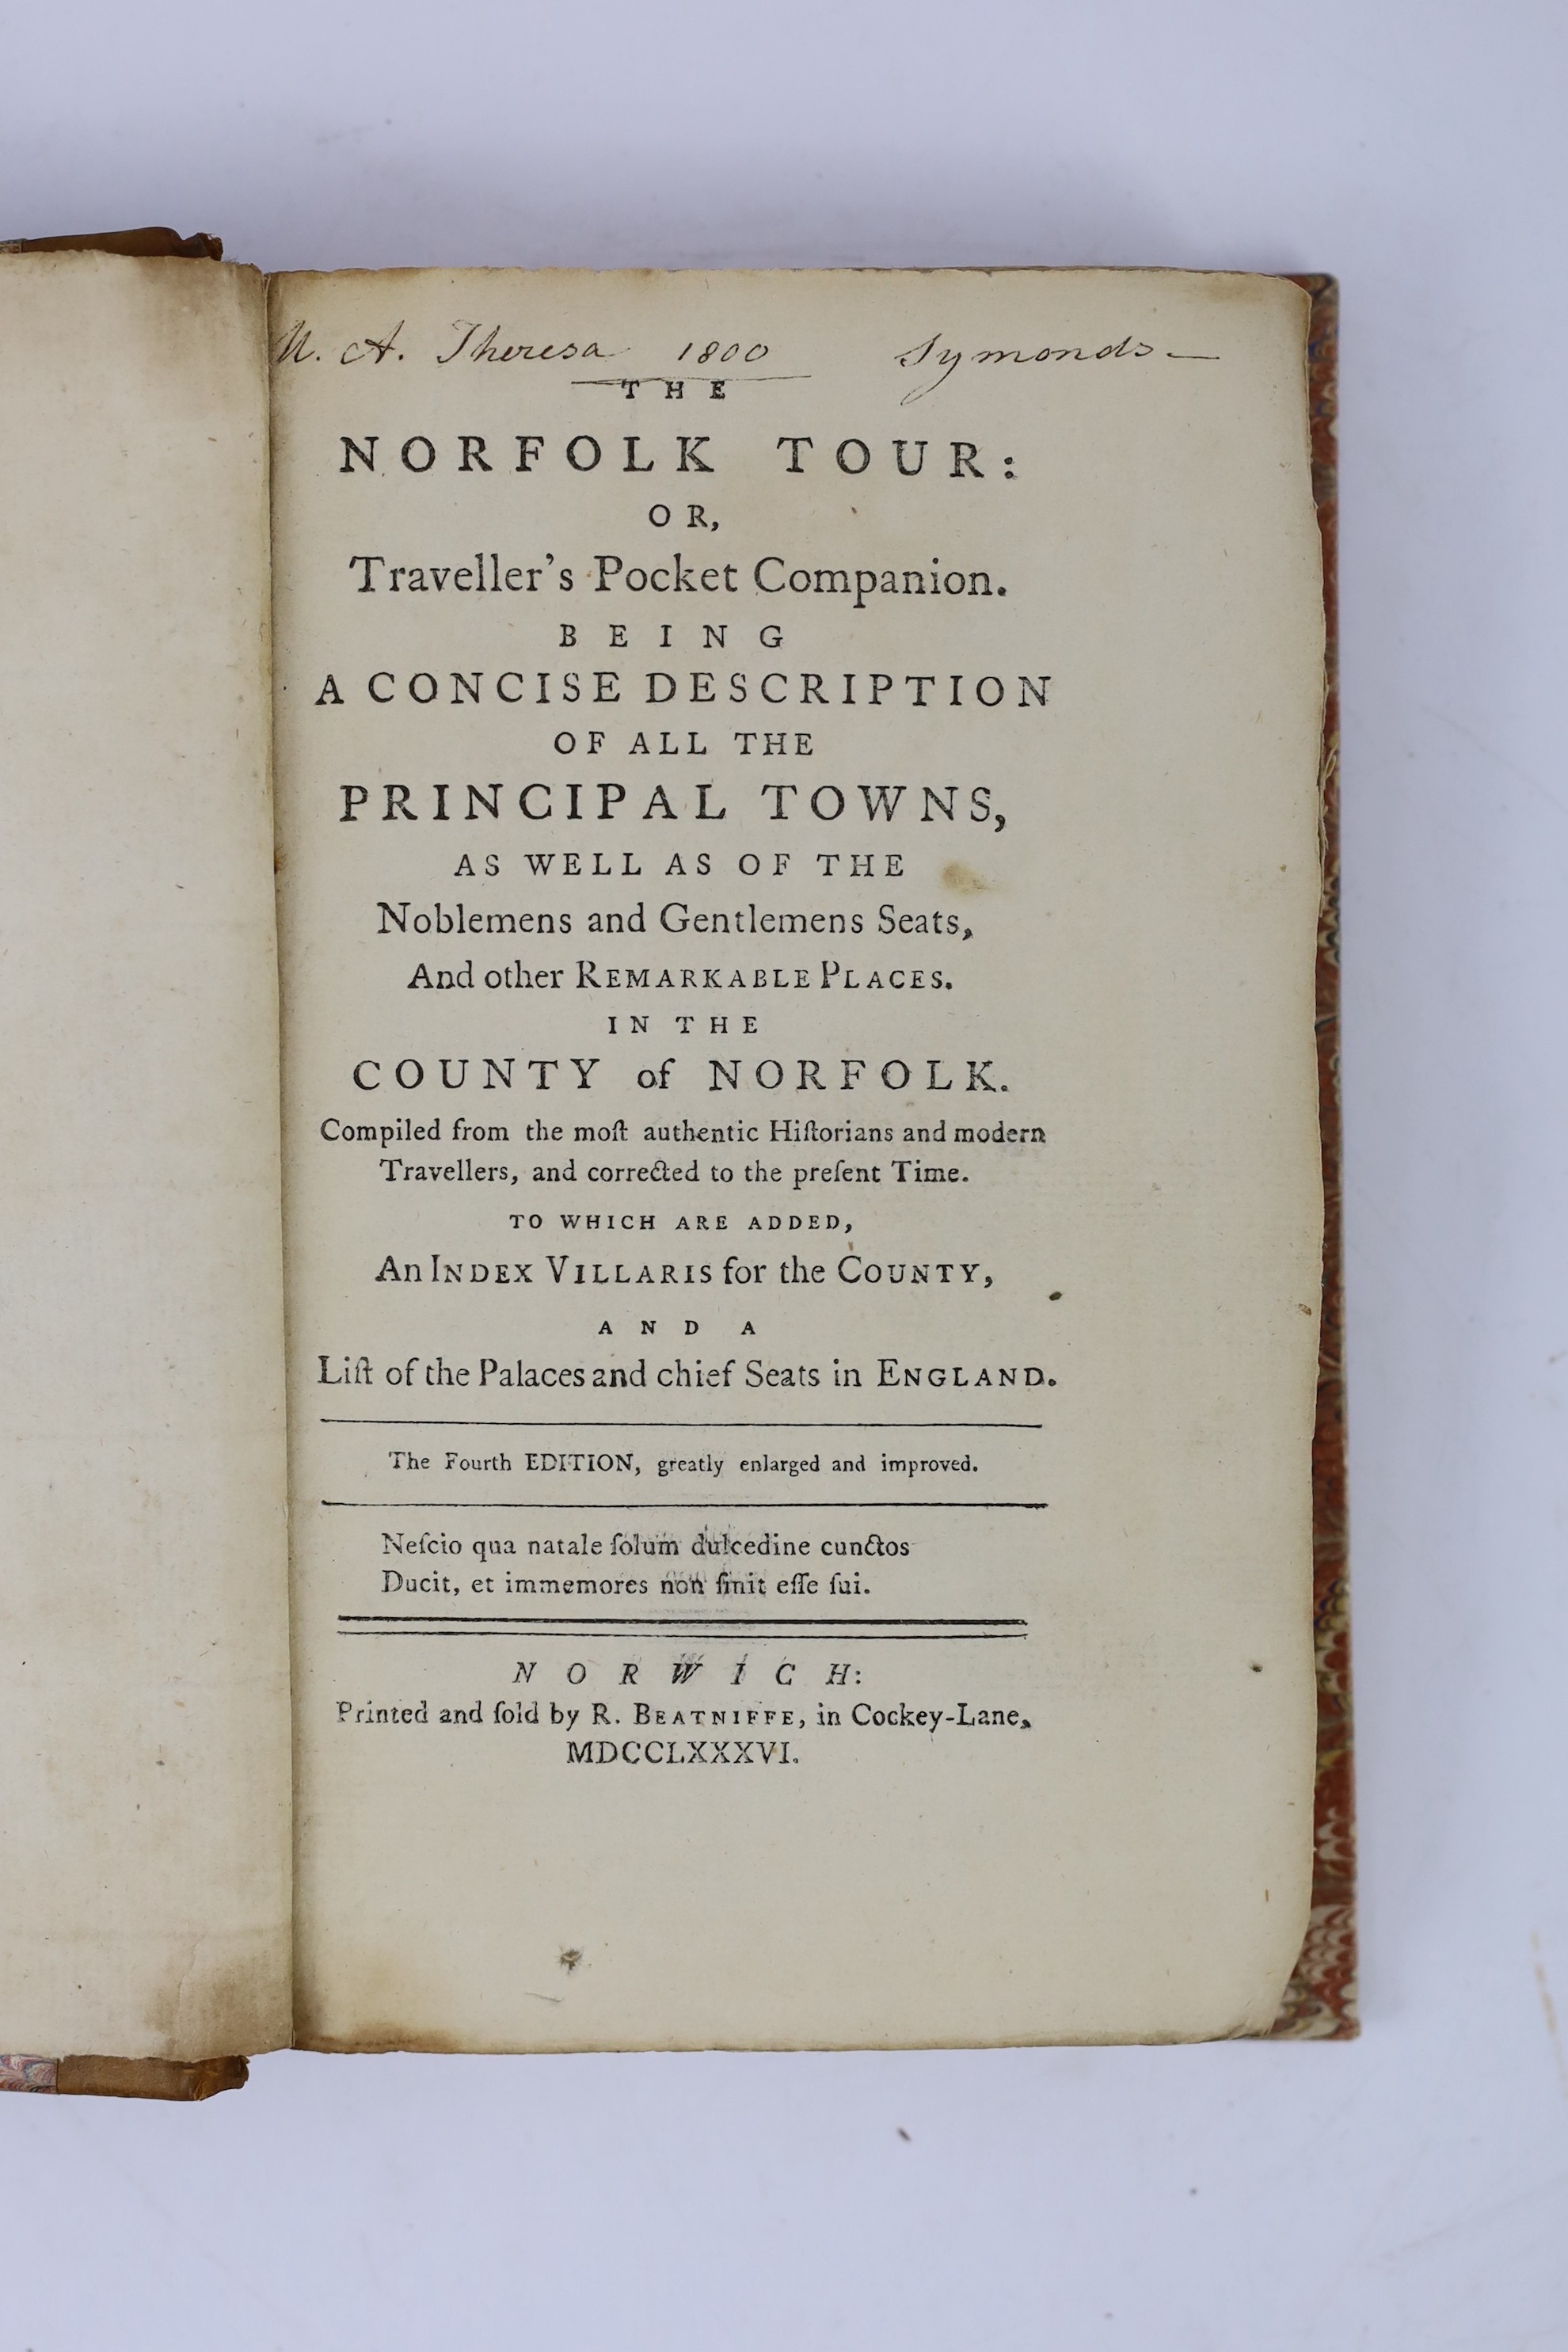 NORFOLK: Excursions in the County of Norfolk....forming a complete guide for the traveller and tourist. 2 vols. pictorial engraved and printed titles, folded map, folded plan and 96 plates; contemp. half morocco and marb